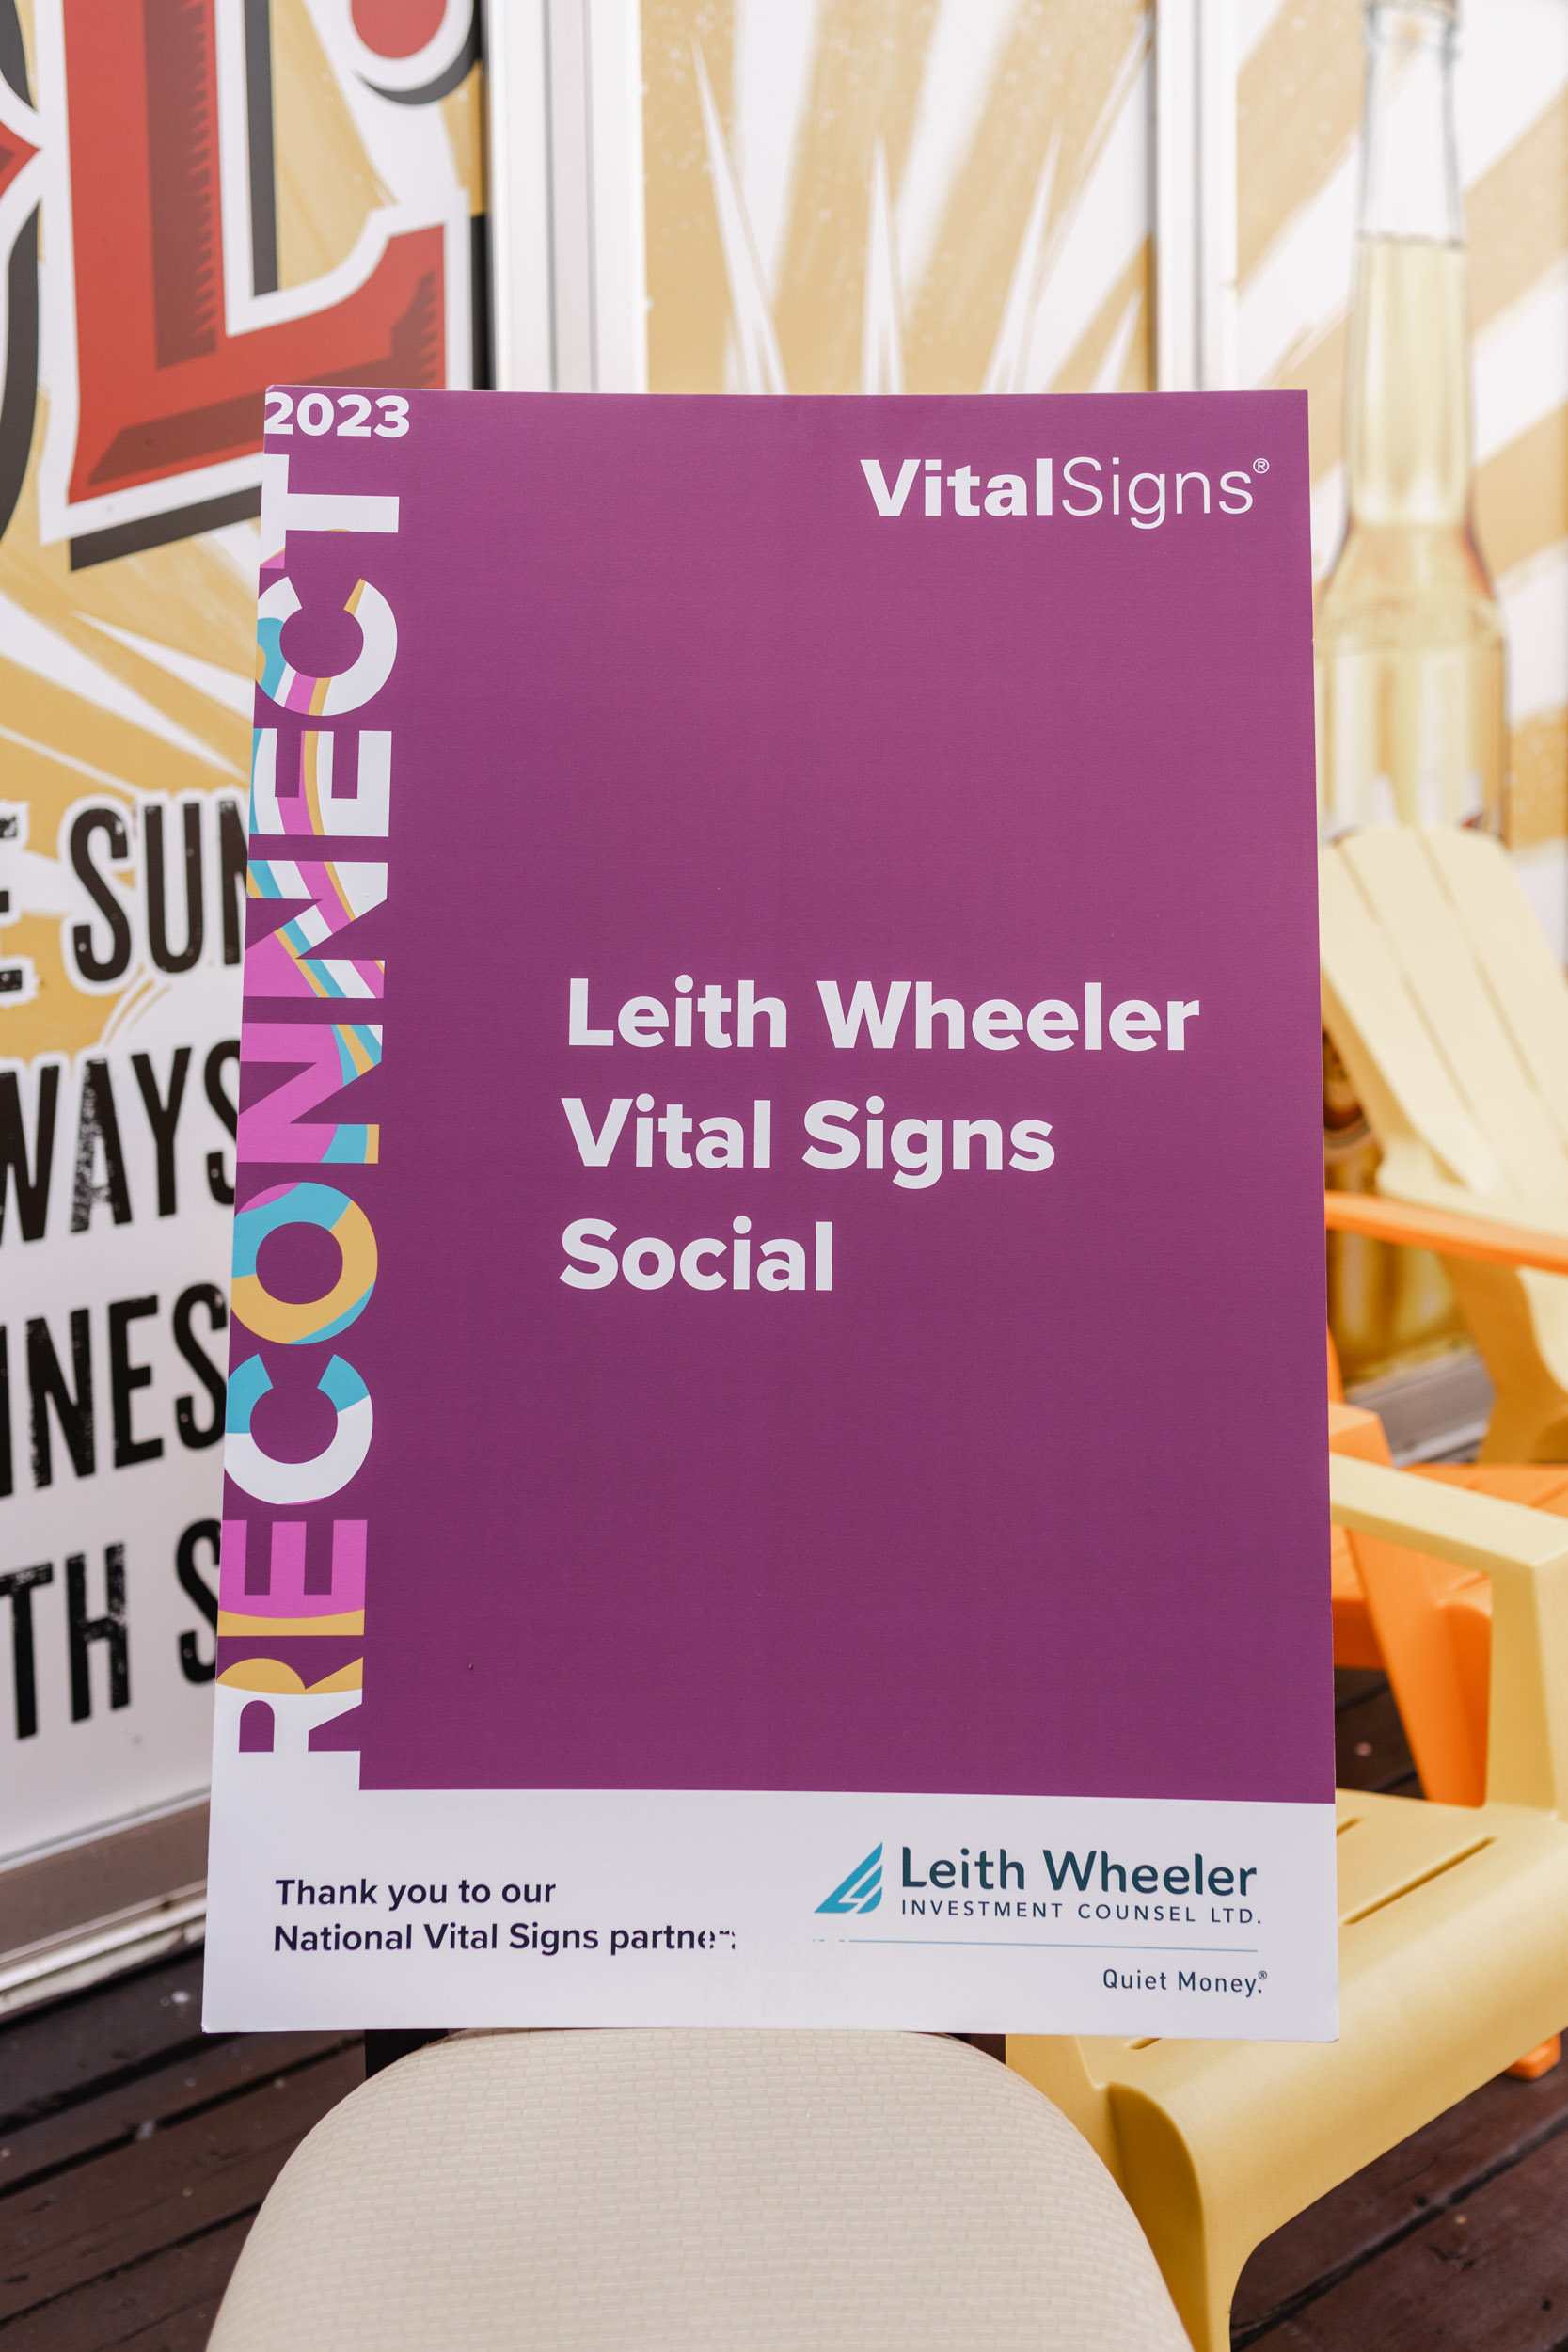 Photographed conference signage displaying "Vital Signs Social.